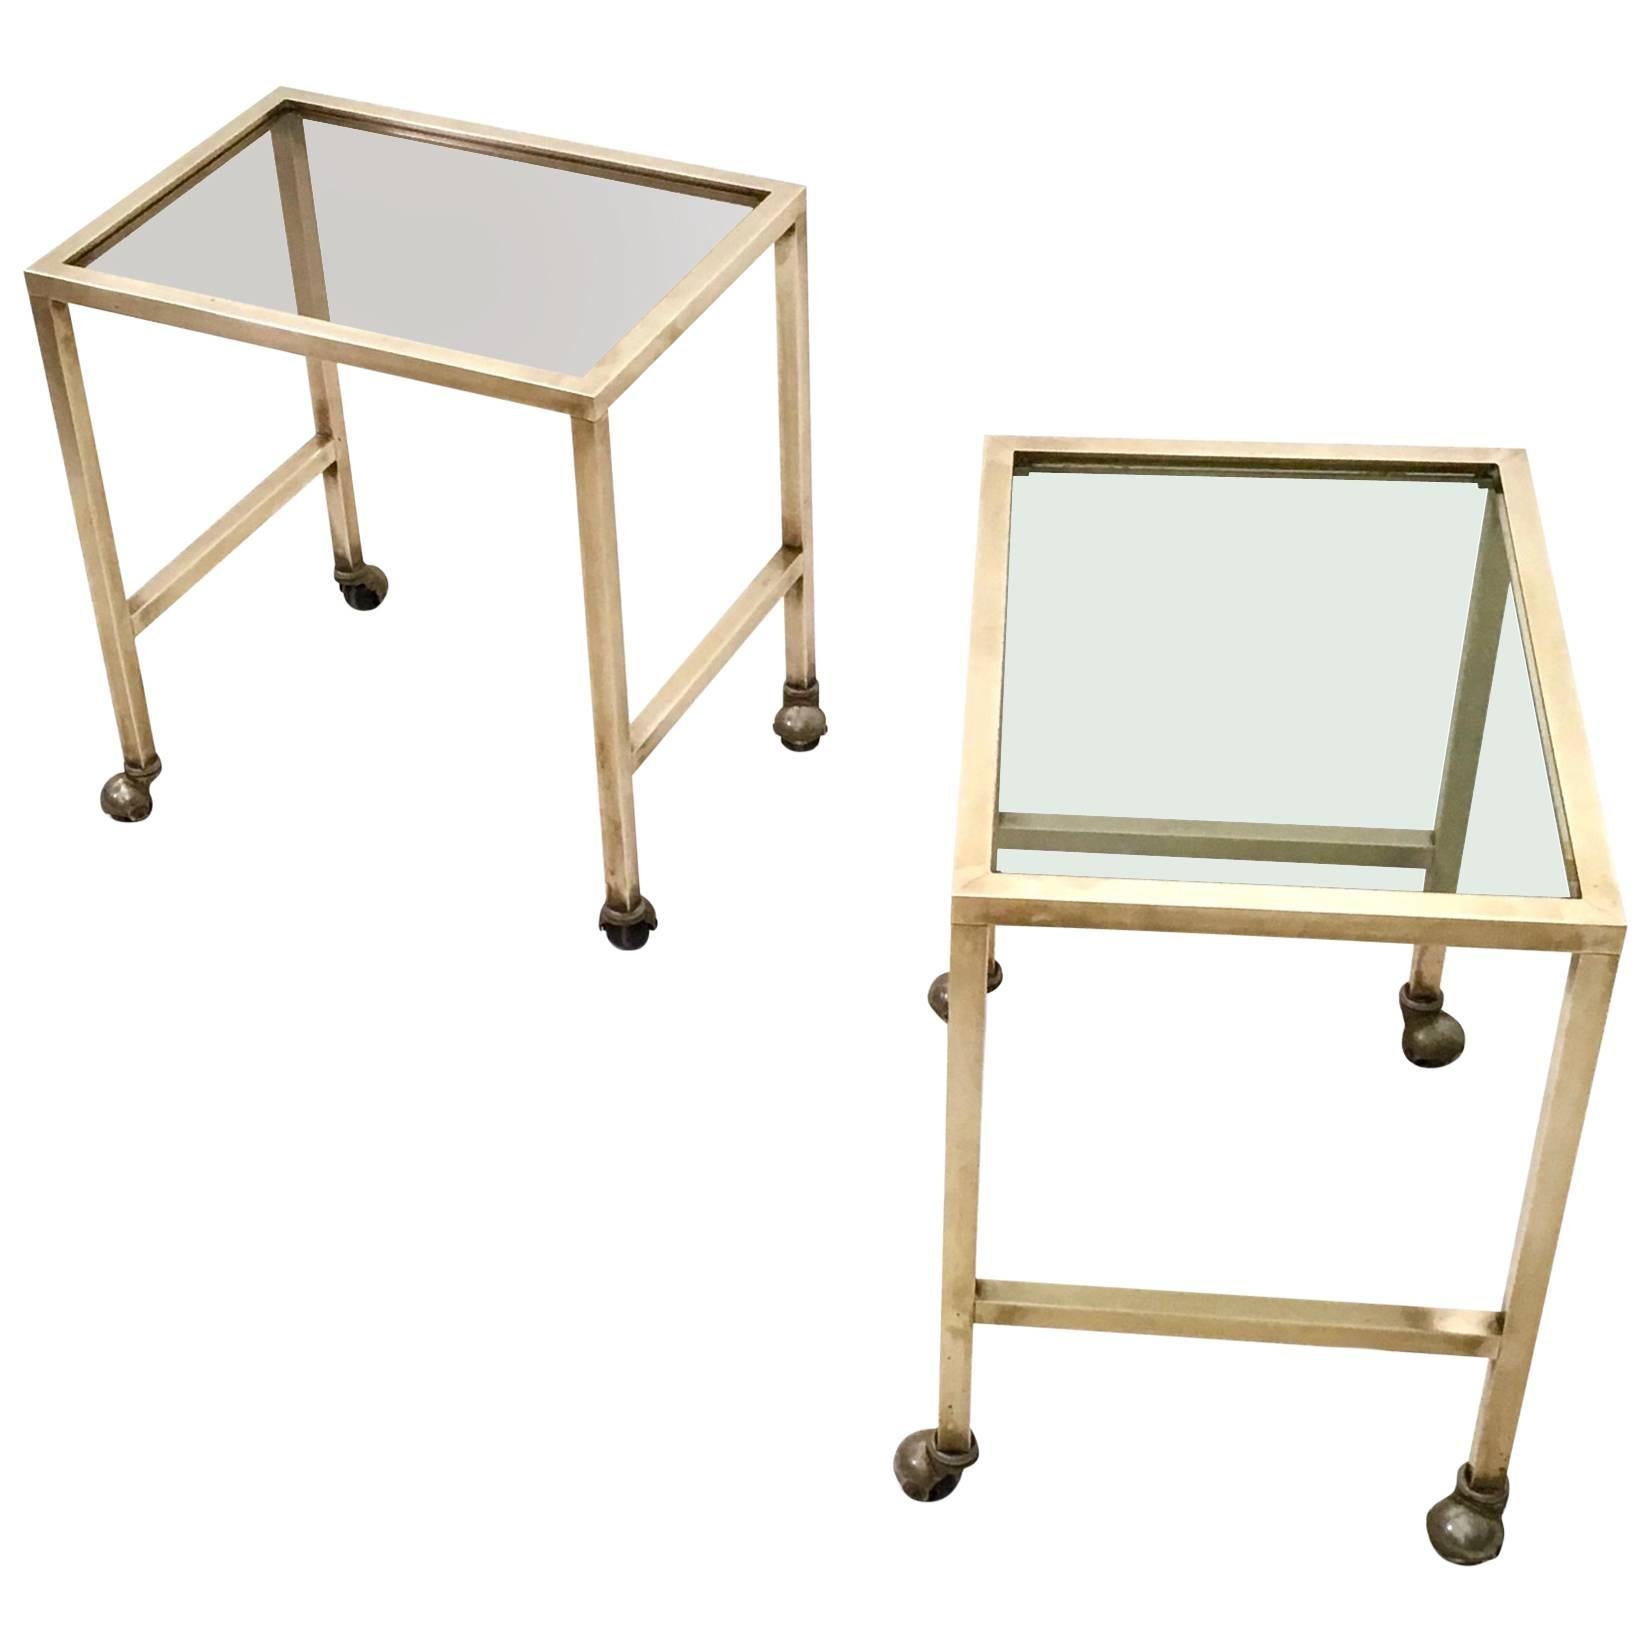 Pair of Brass and Smoked Glass Nightstands on Casters, Italy, 1970s